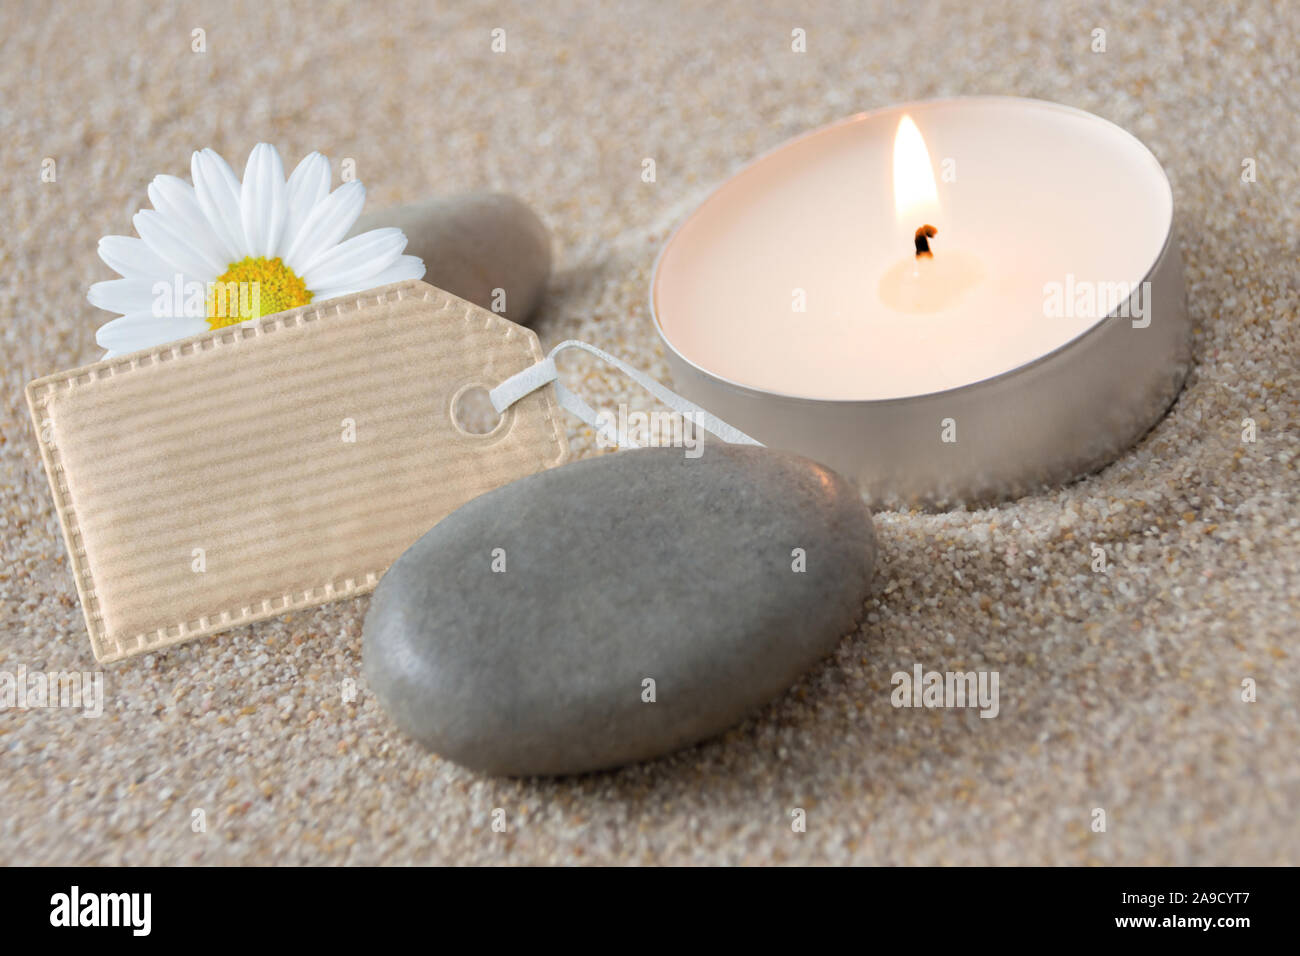 Wellness label and candle Stock Photo